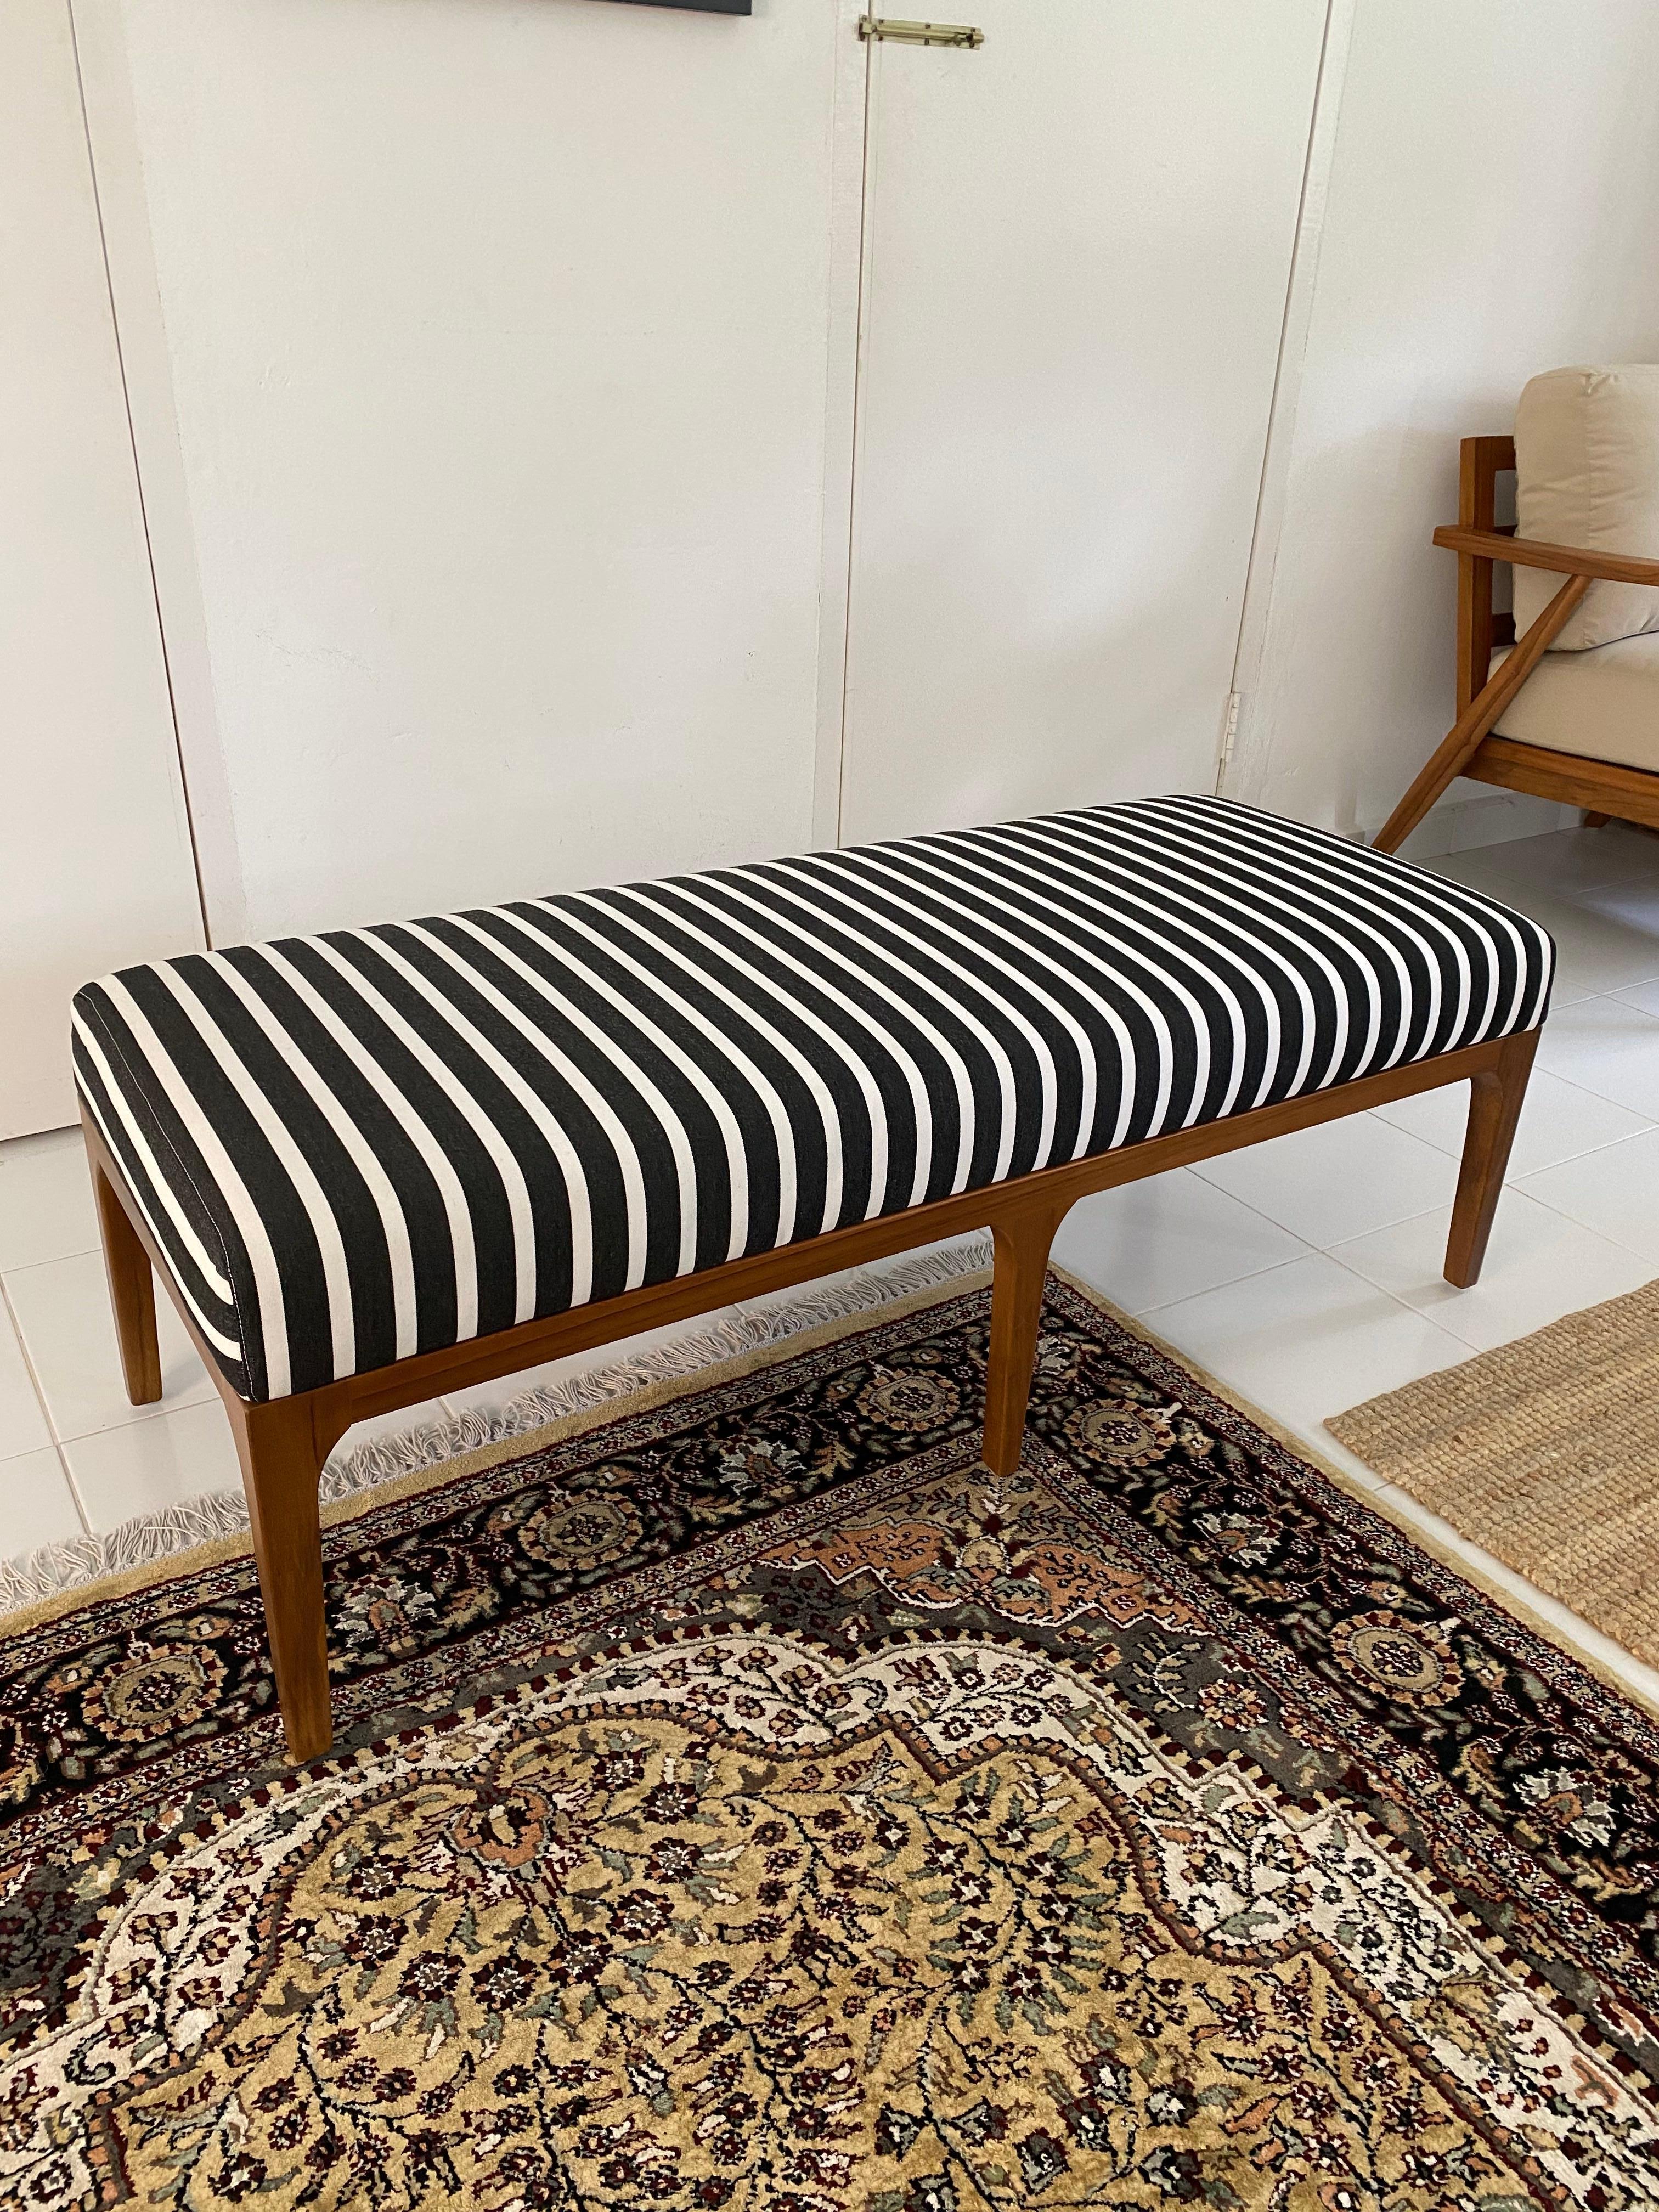 This mid-century style bench is made of premium, sustainably sourced teak and is an essential furniture item for your home. Place it at the end of your bed for an elegant addition to your bedroom space, or put in in the living room or dining room